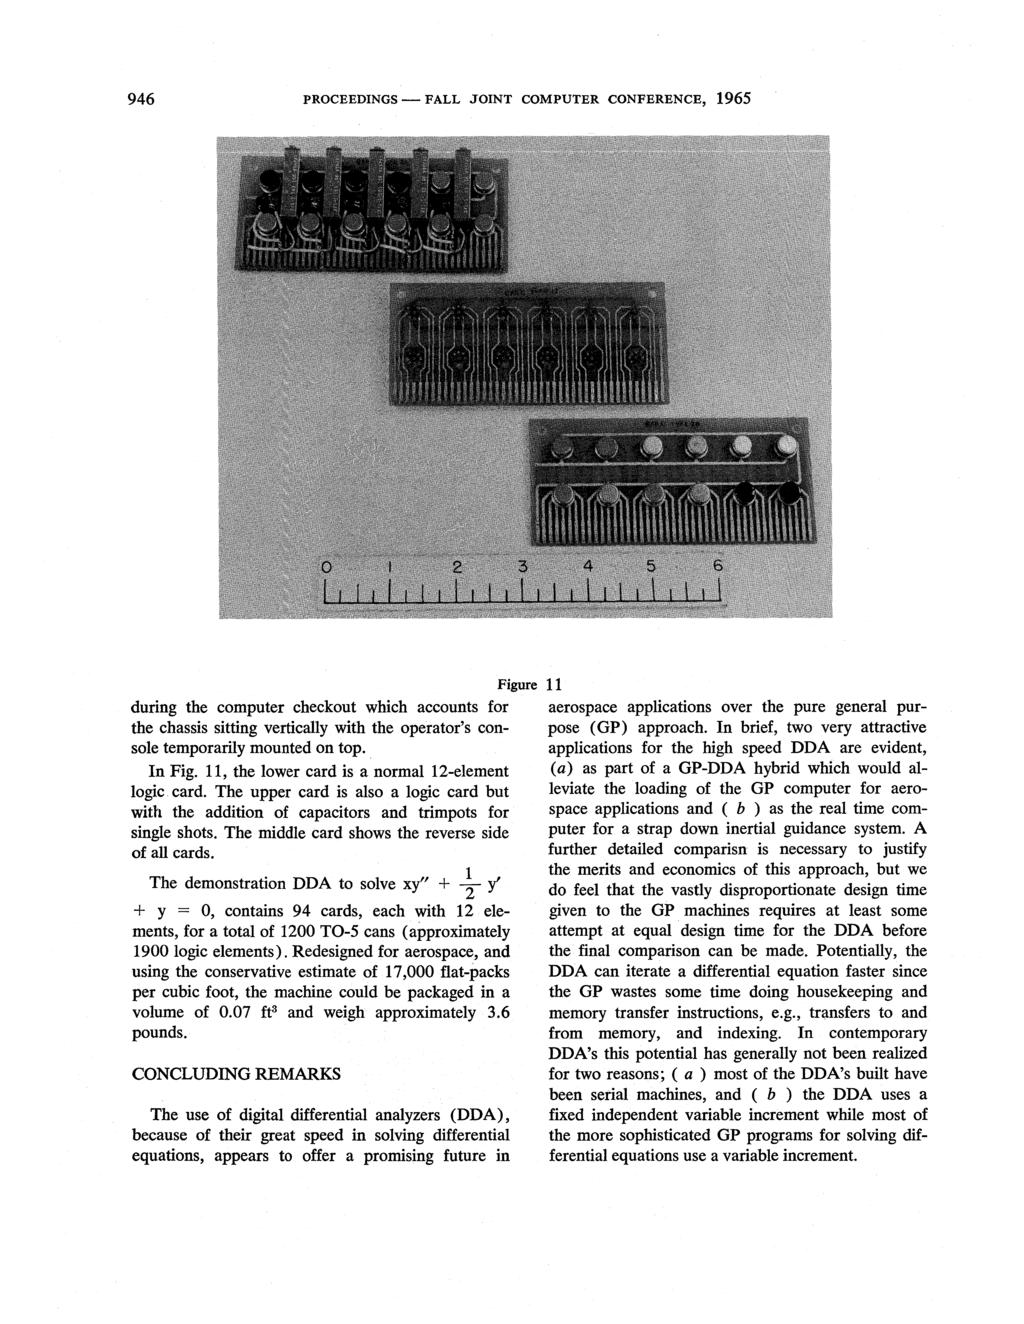 946 PROCEEDINGS - FALL JOINT COMPUTER CONFERENCE, 1965 Figre 11 dring the compter checkot which acconts for aerospace applications over the pre general prthe chassis sitting vertically with the